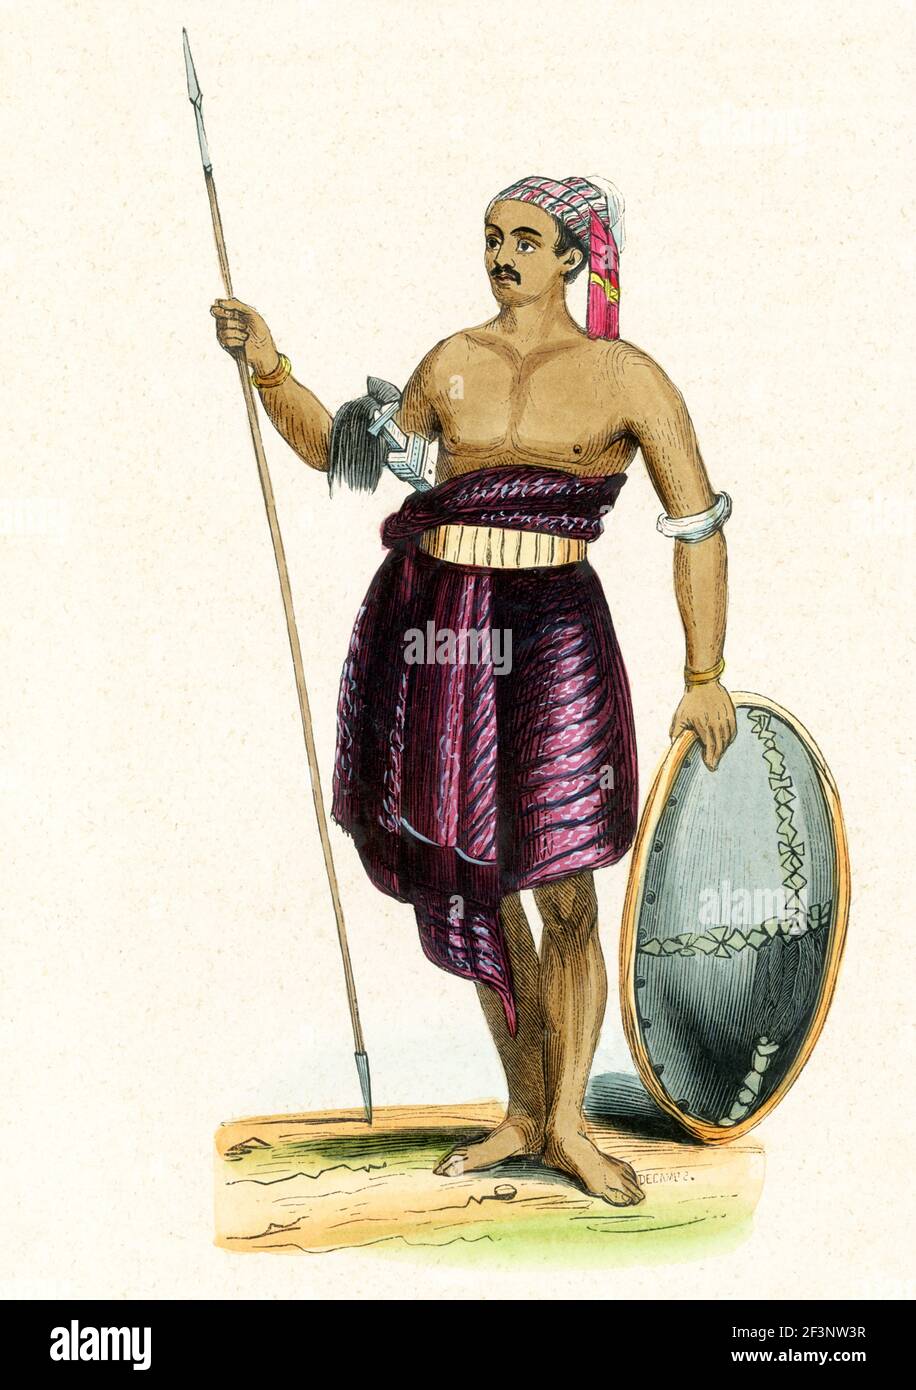 This 1840s illustration shows a warrior from the island of Savu. Savu is the largest of a group of three islands, situated midway between Sumba and Rote, west of Timor, in Indonesia's eastern province, East Nusa Tenggara. Ferries connect the islands to Waingapu on Sumba, Ende on Flores, and Kupang in West Timor. Savu is part of the area of the world known as Oceania. Oceania is a geographic region that includes Australasia, Melanesia, Micronesia and Polynesia. Spanning the Eastern and Western Hemispheres, Oceania has a land area of 8,525,989 square kilometers. Stock Photo